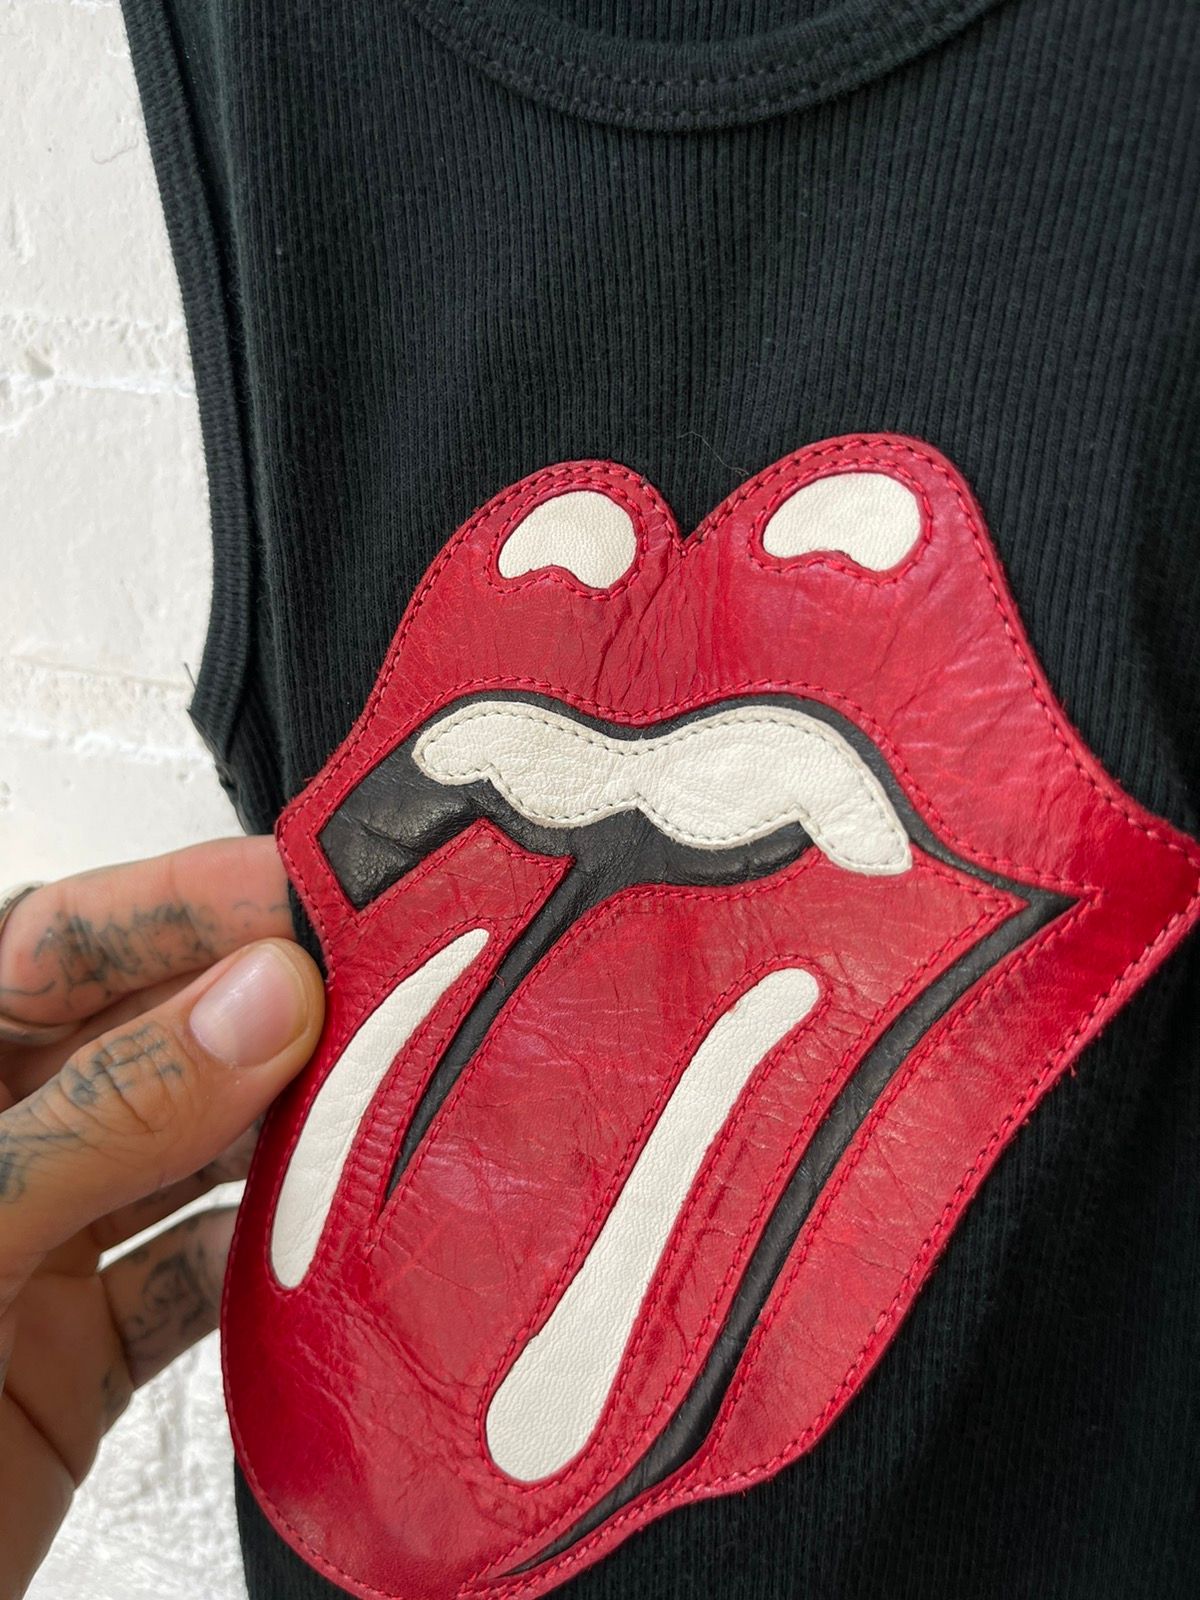 Chrome Hearts ROLLING STONES LARGE LEATHER PATCH TANK SHIRT